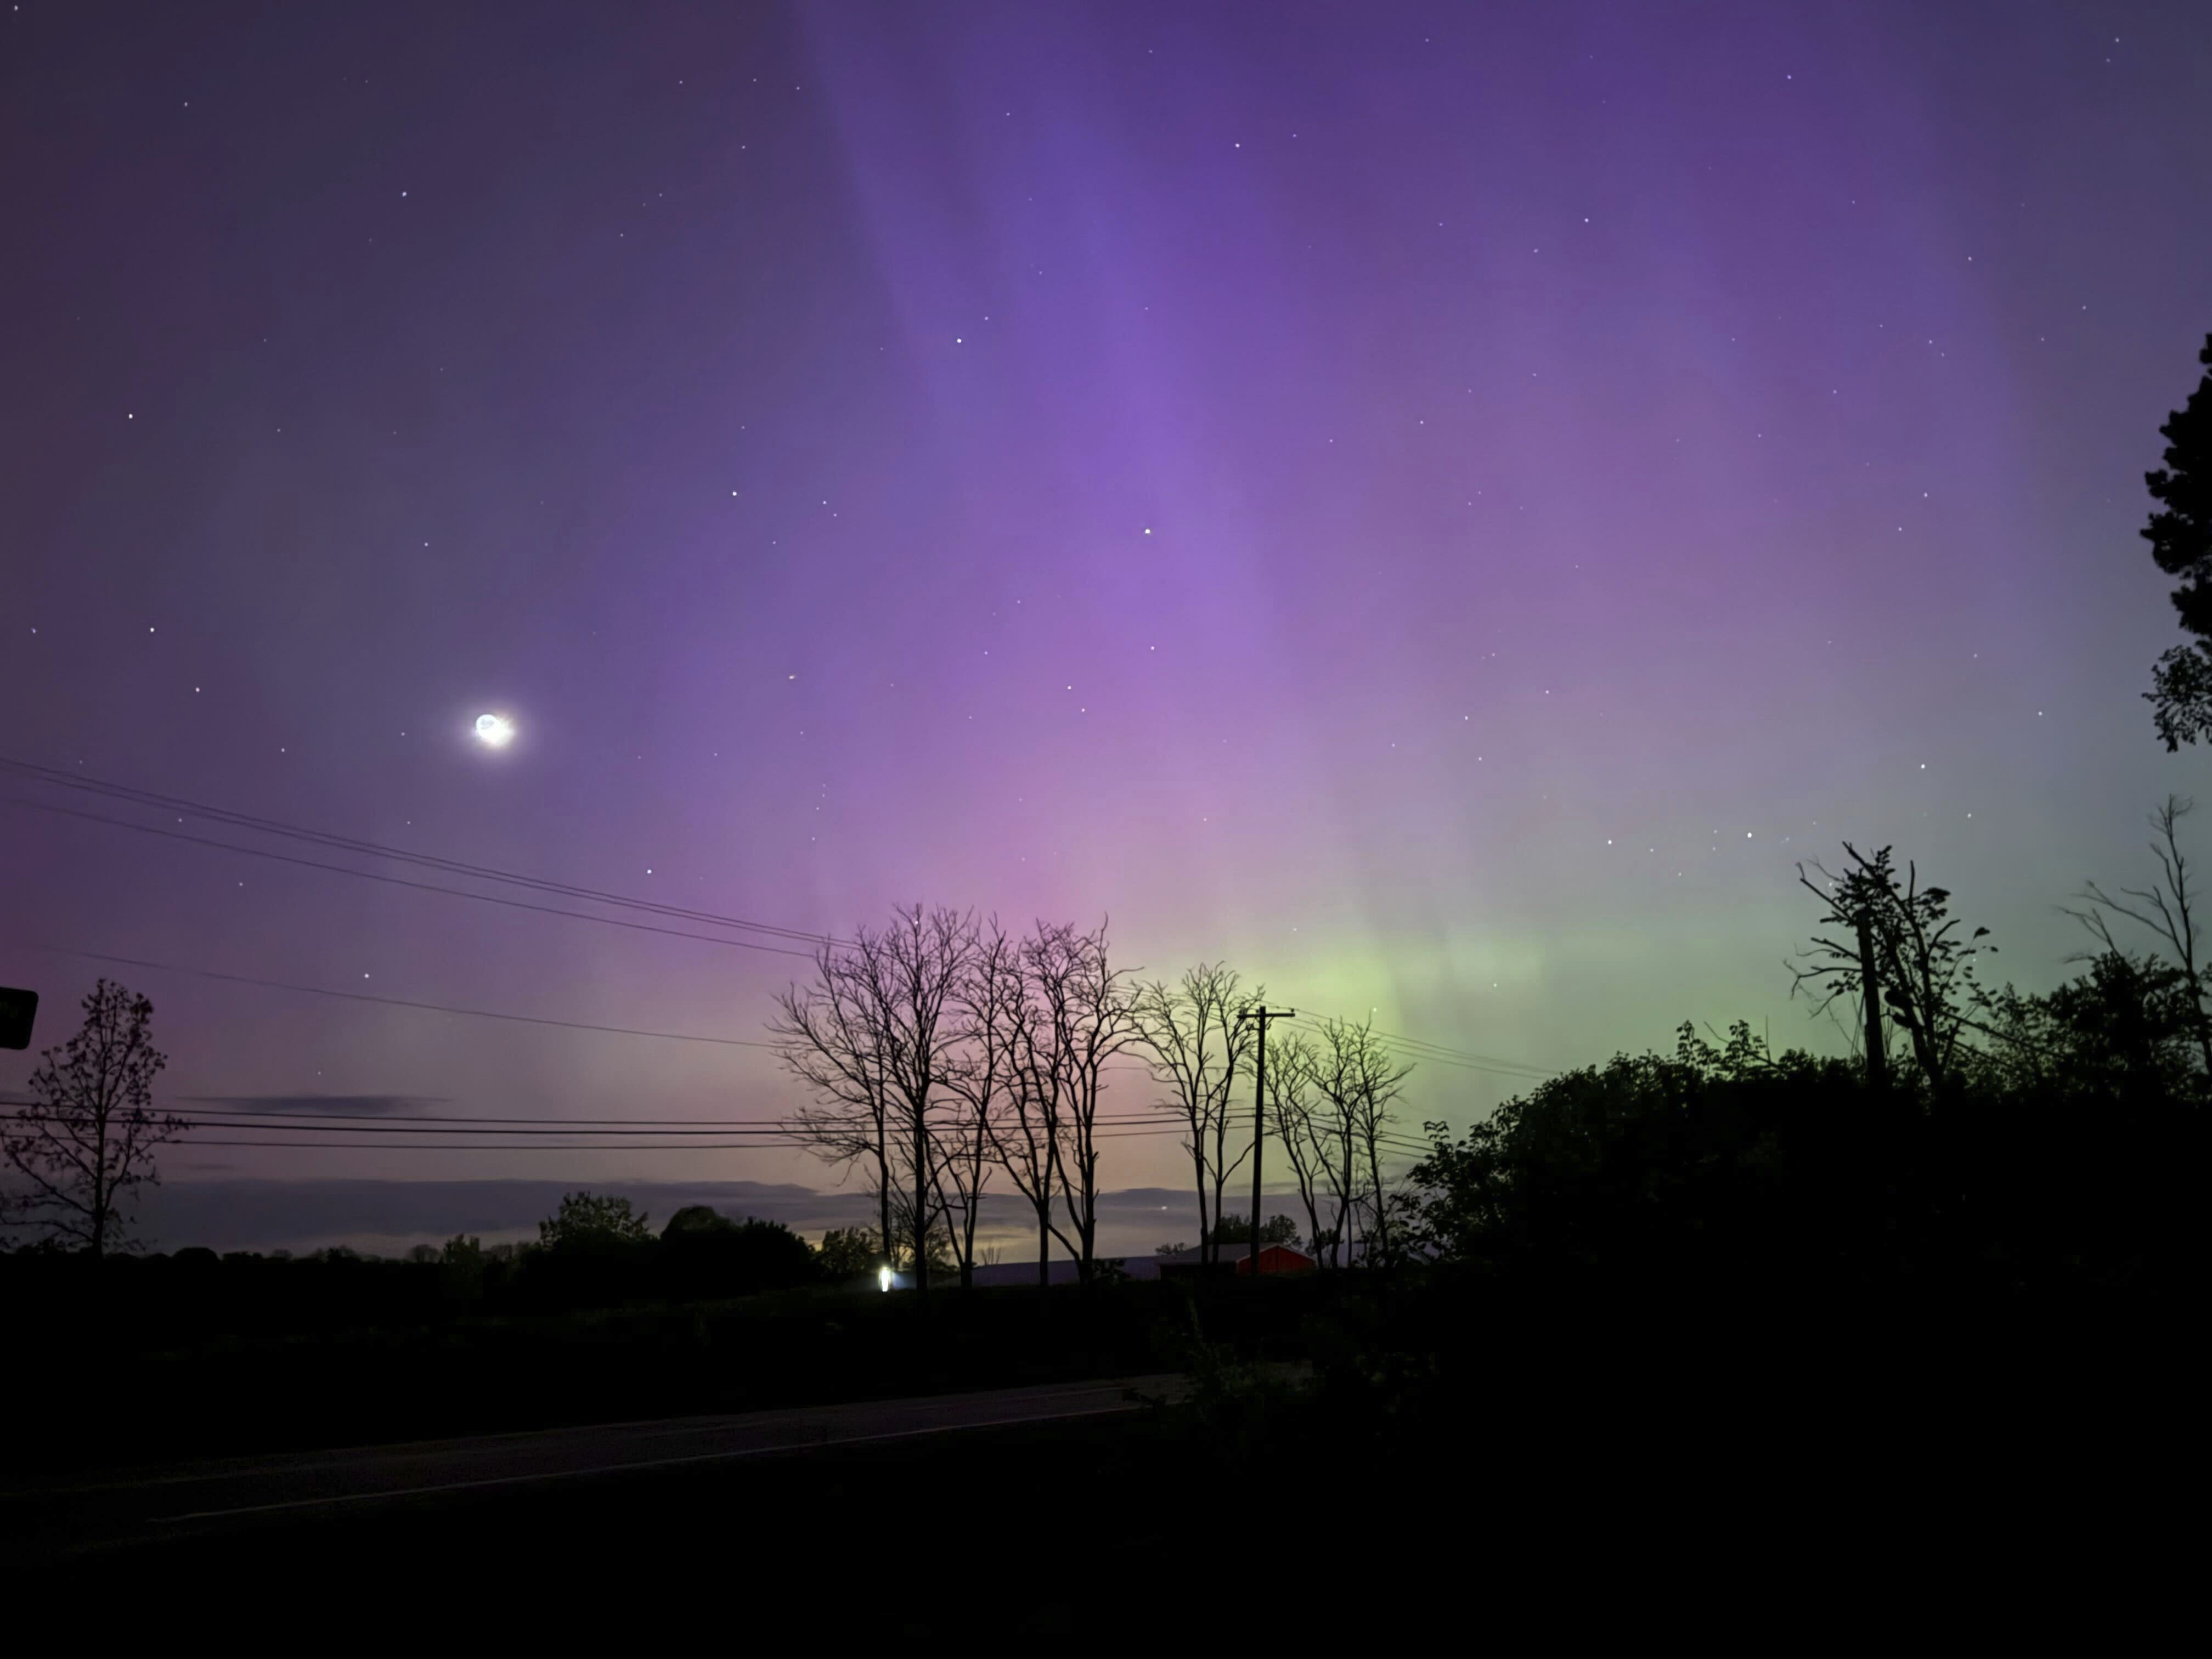 Missed Friday's Northern Lights? The global light show, in photos